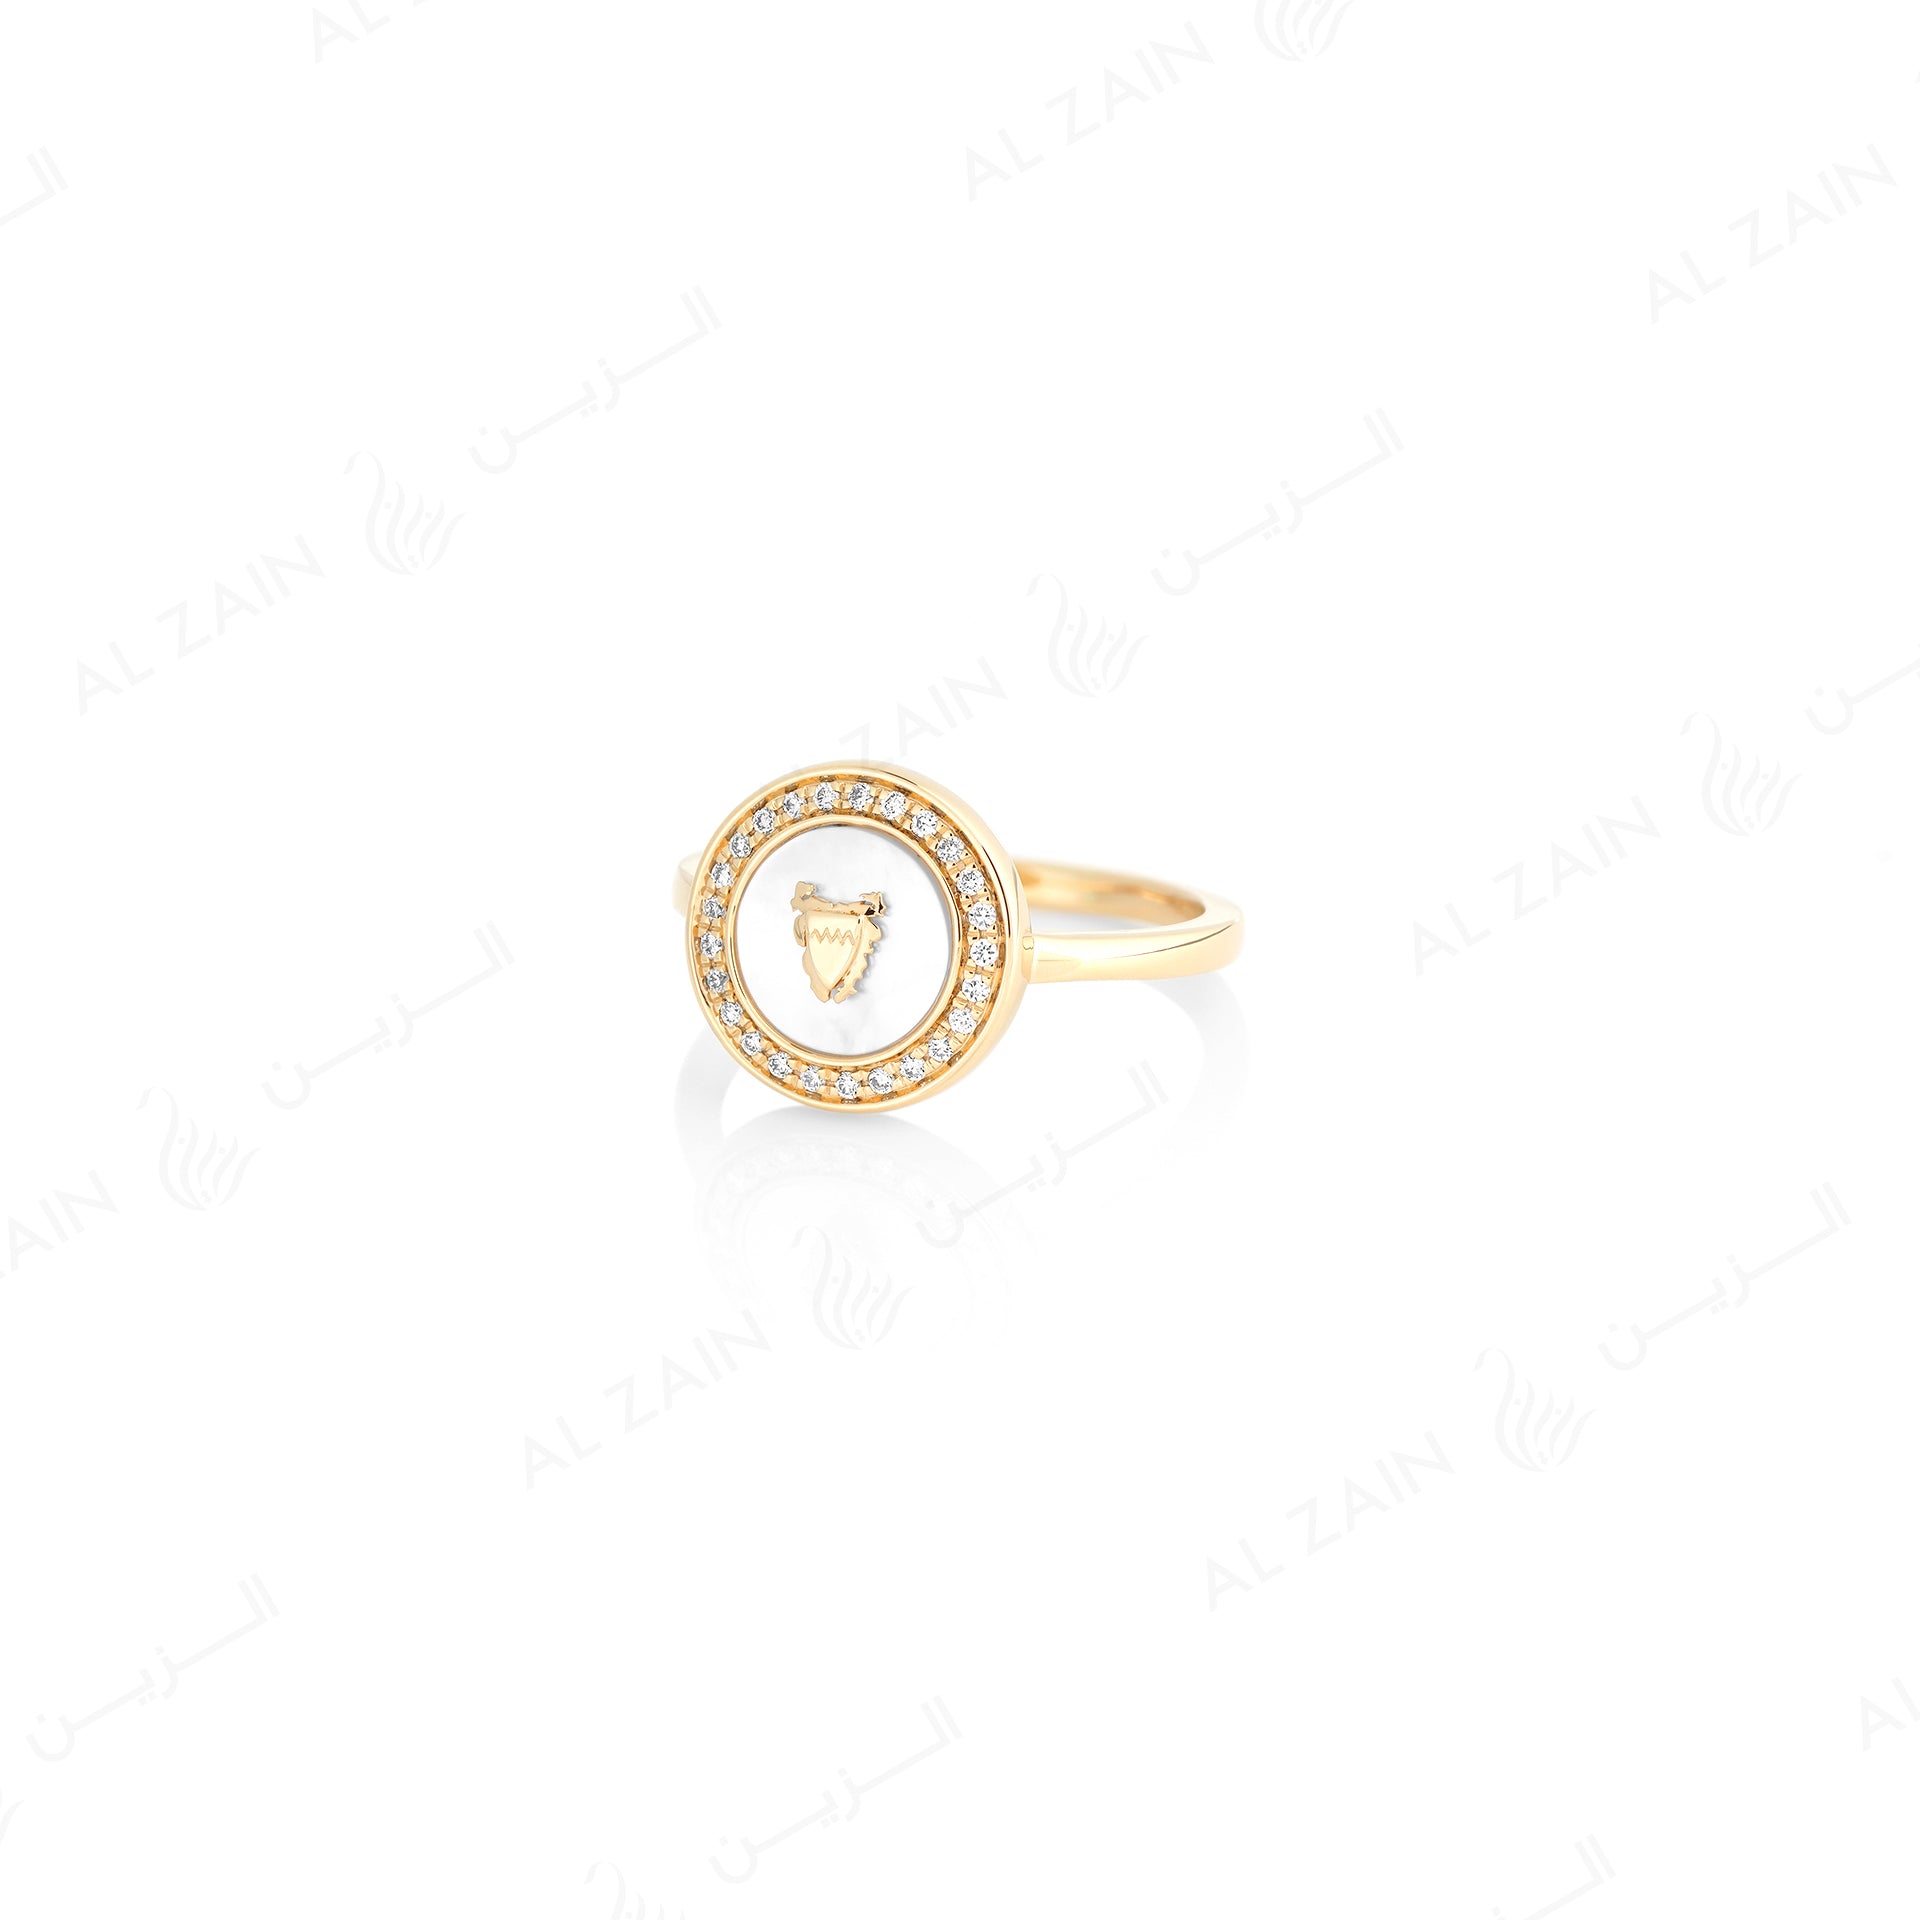 Bahrain flag Ring in 18k yellow gold with Mother of Pearl and Diamonds